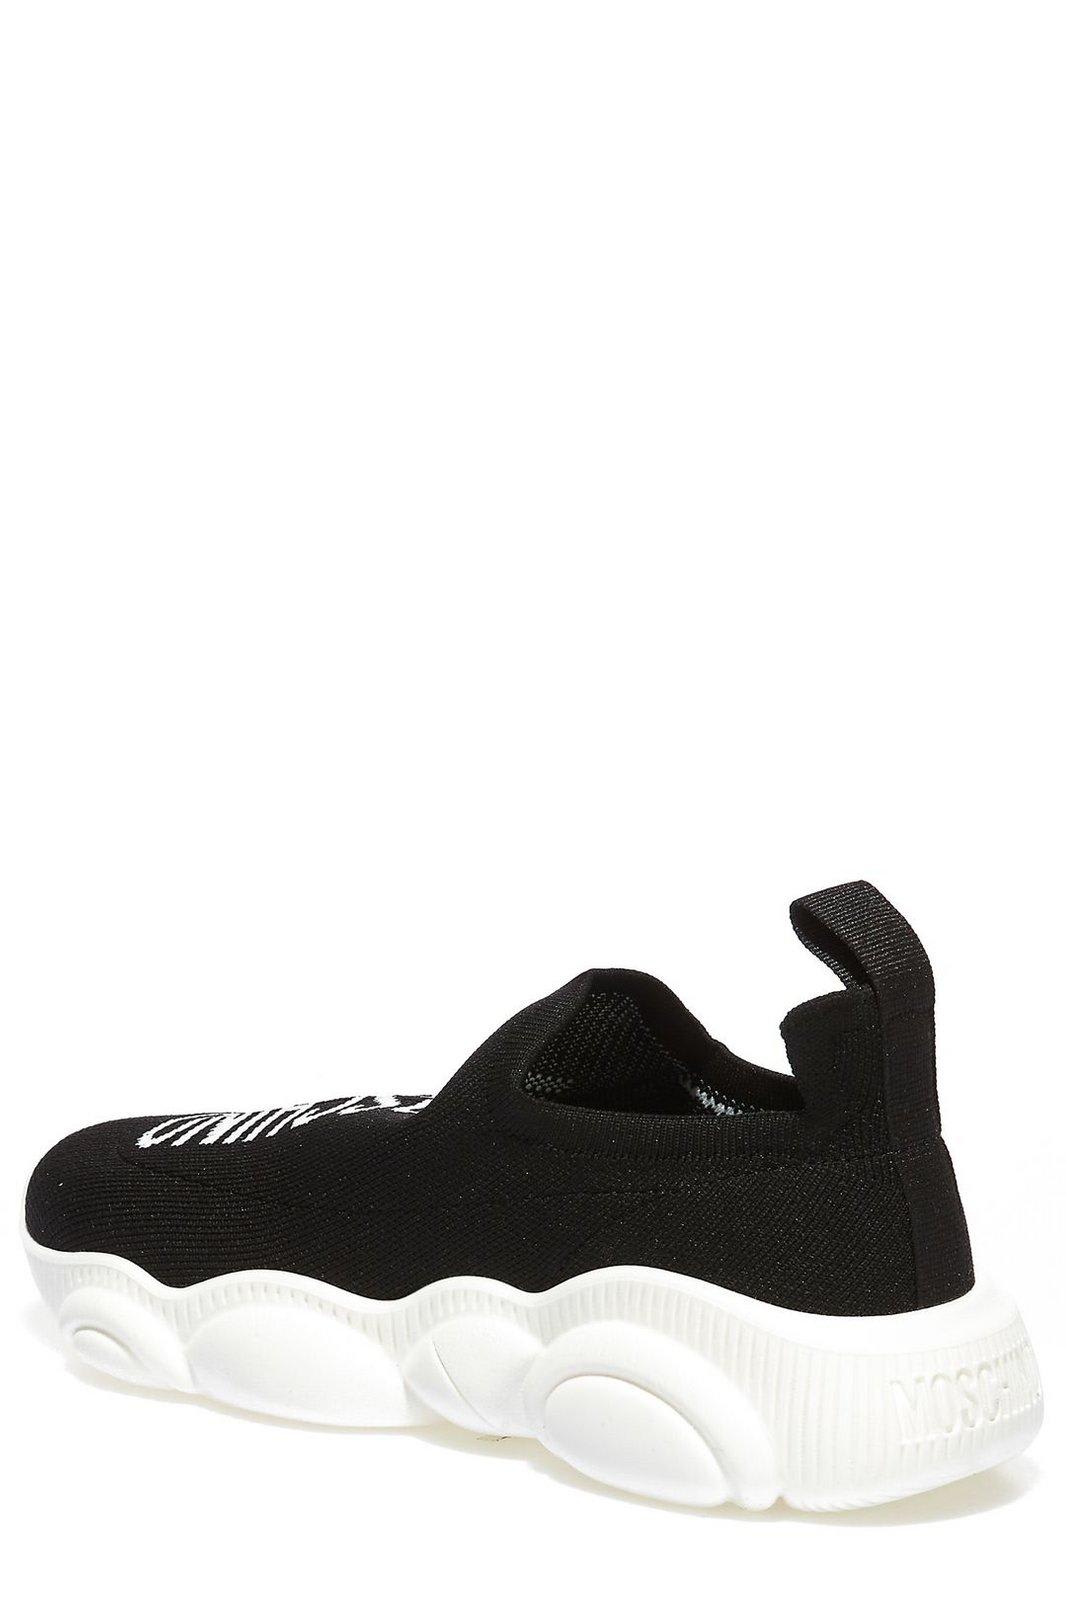 Shop Moschino Teddy Slip On Sneakers In Black